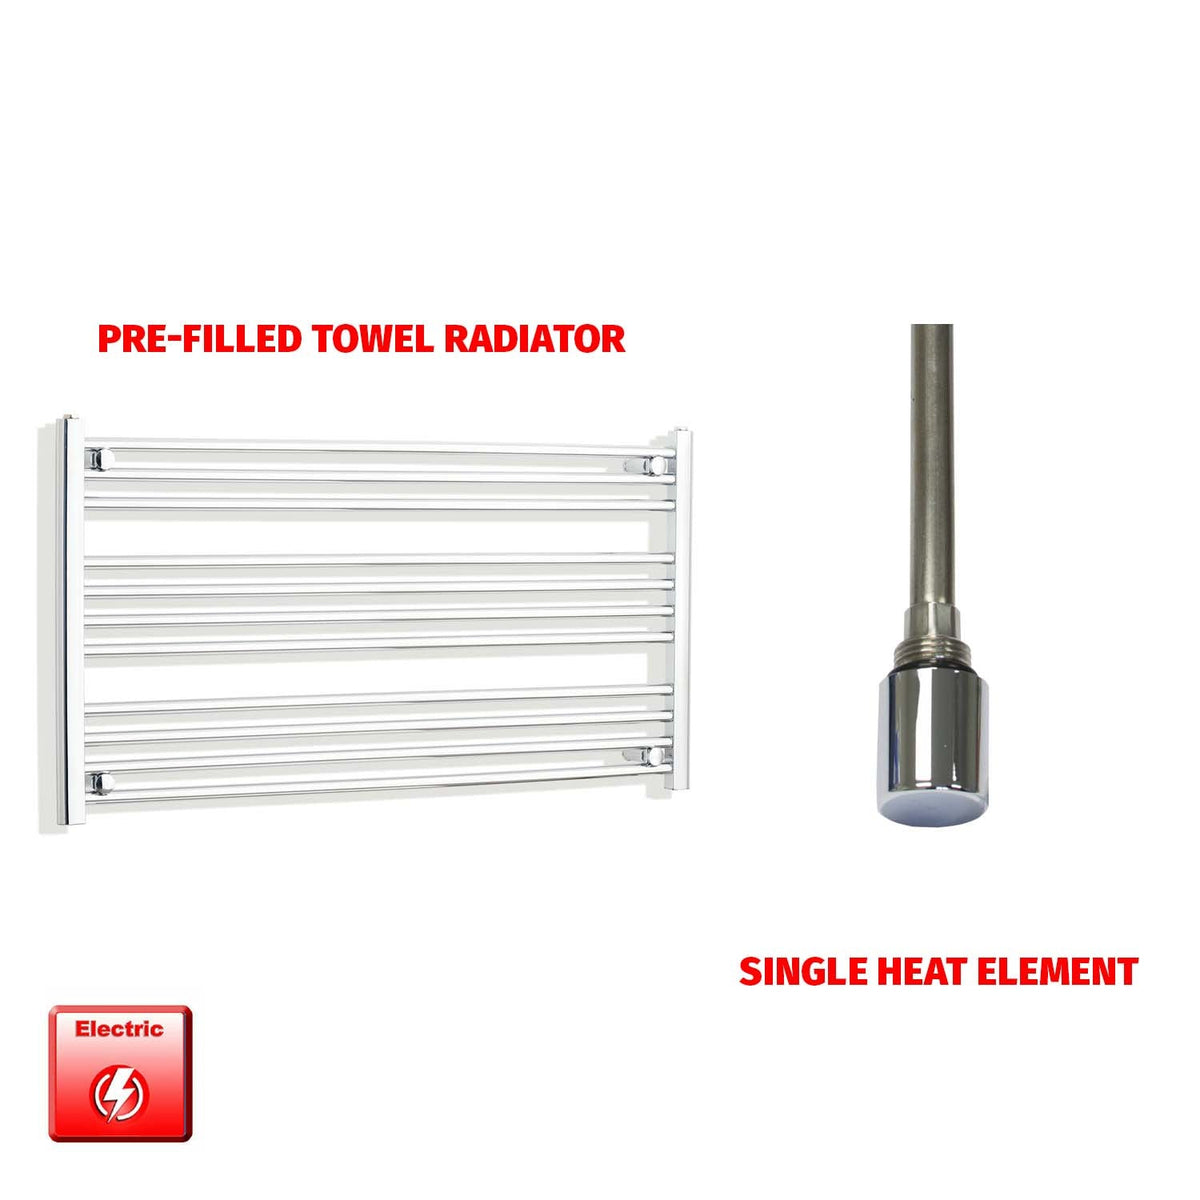 600mm High 1300mm Wide Pre-Filled Electric Heated Towel Radiator Straight Chrome Single heat element no timer